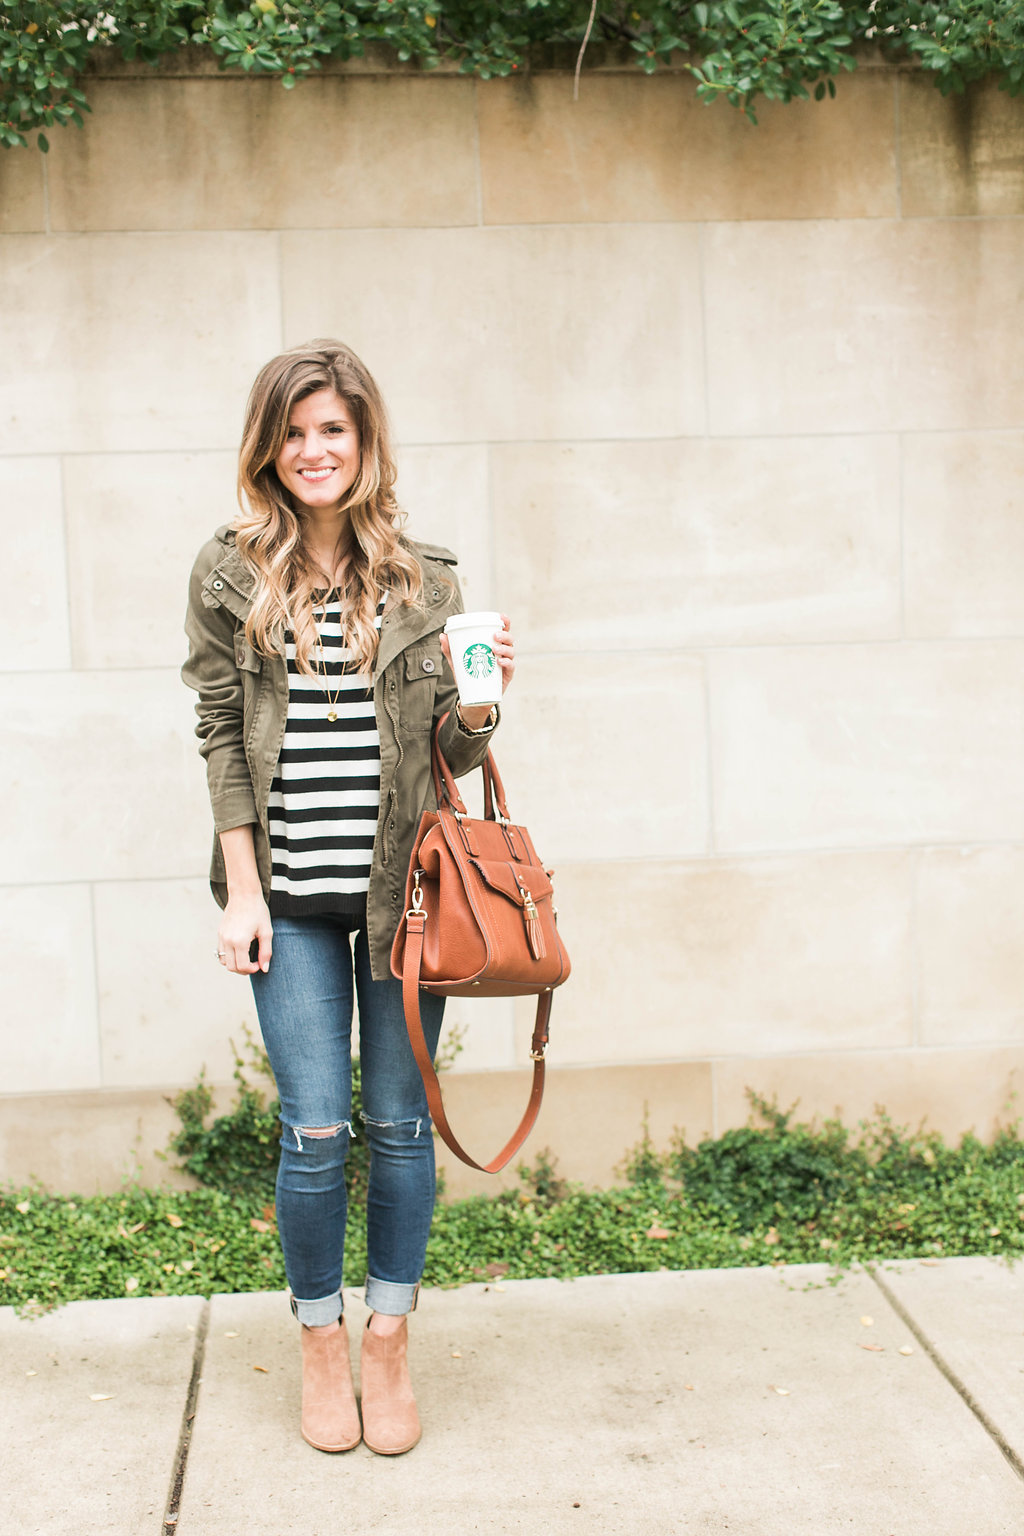 Simple & Cute Fall Outfit Idea - Stripes + Cognac + Green Military Jacket